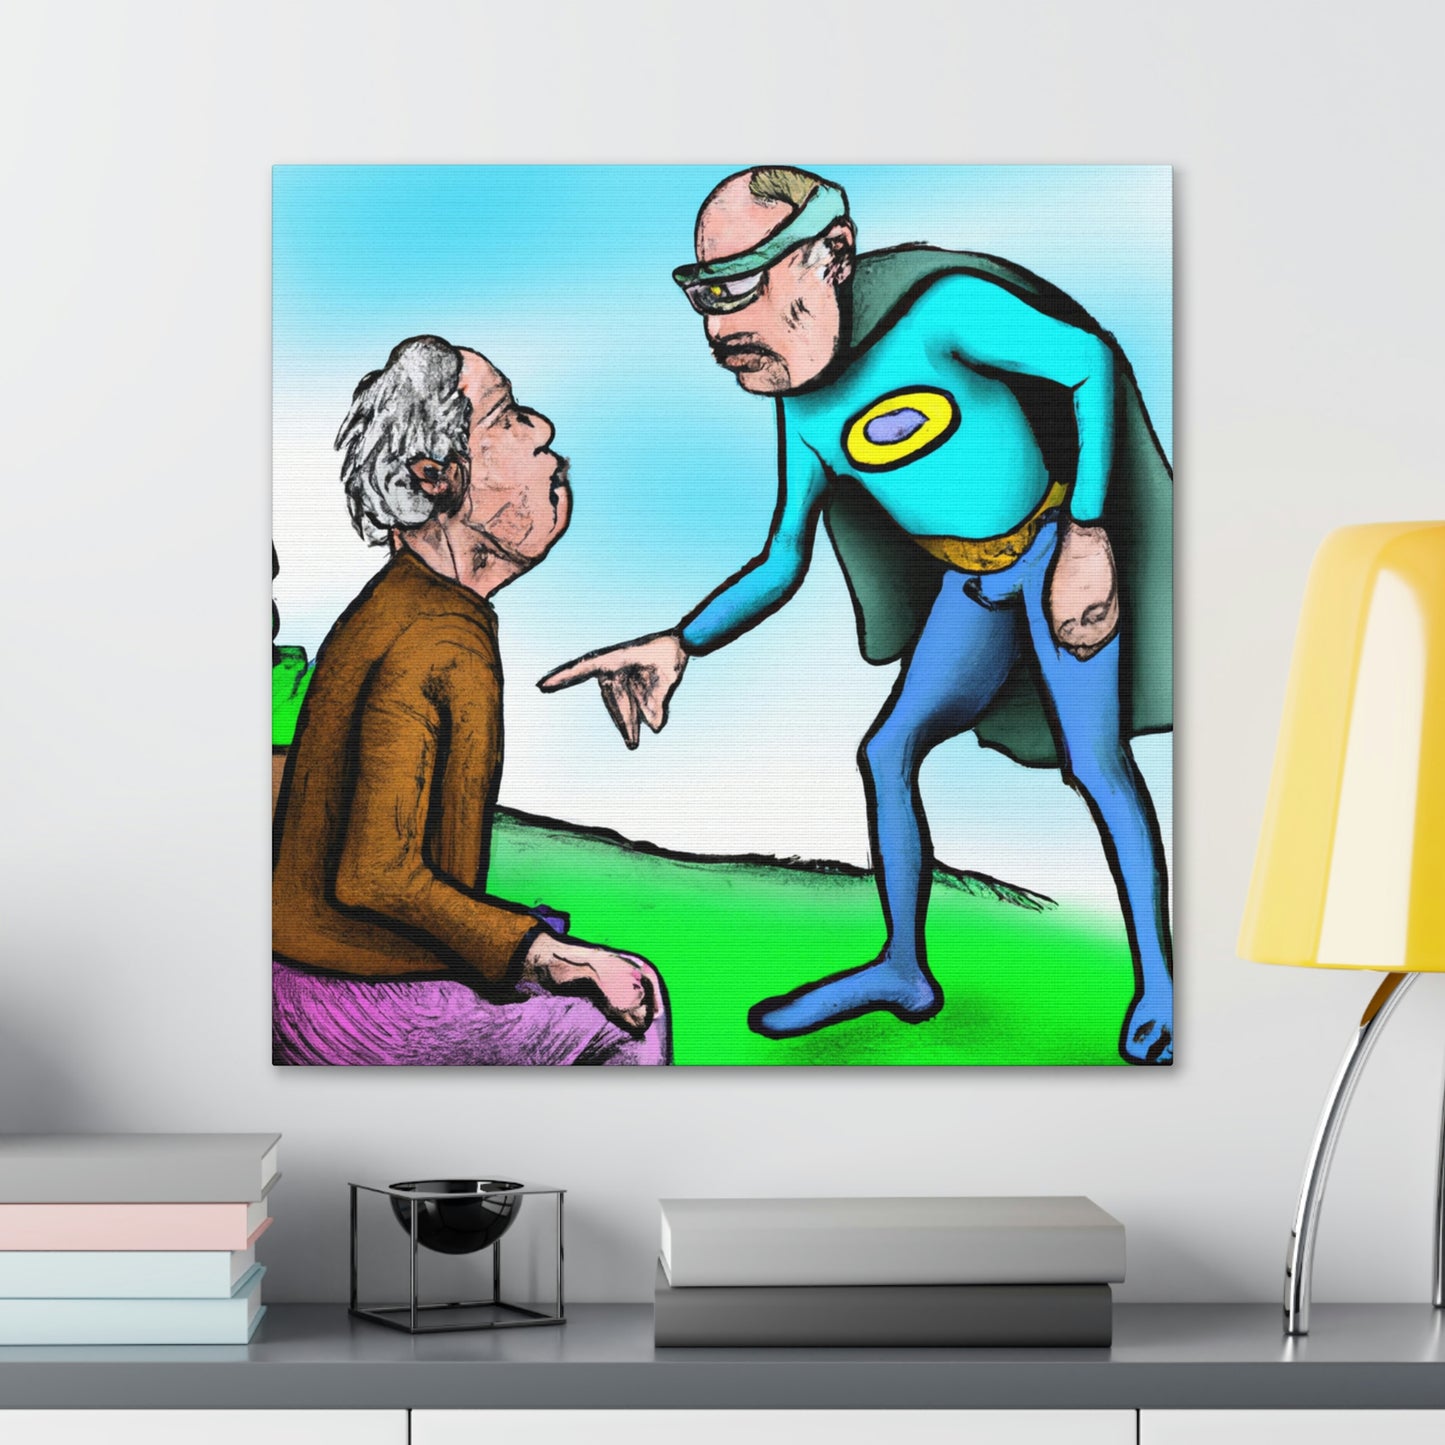 The Mysterious Stranger and the Retired Superhero - The Alien Canva